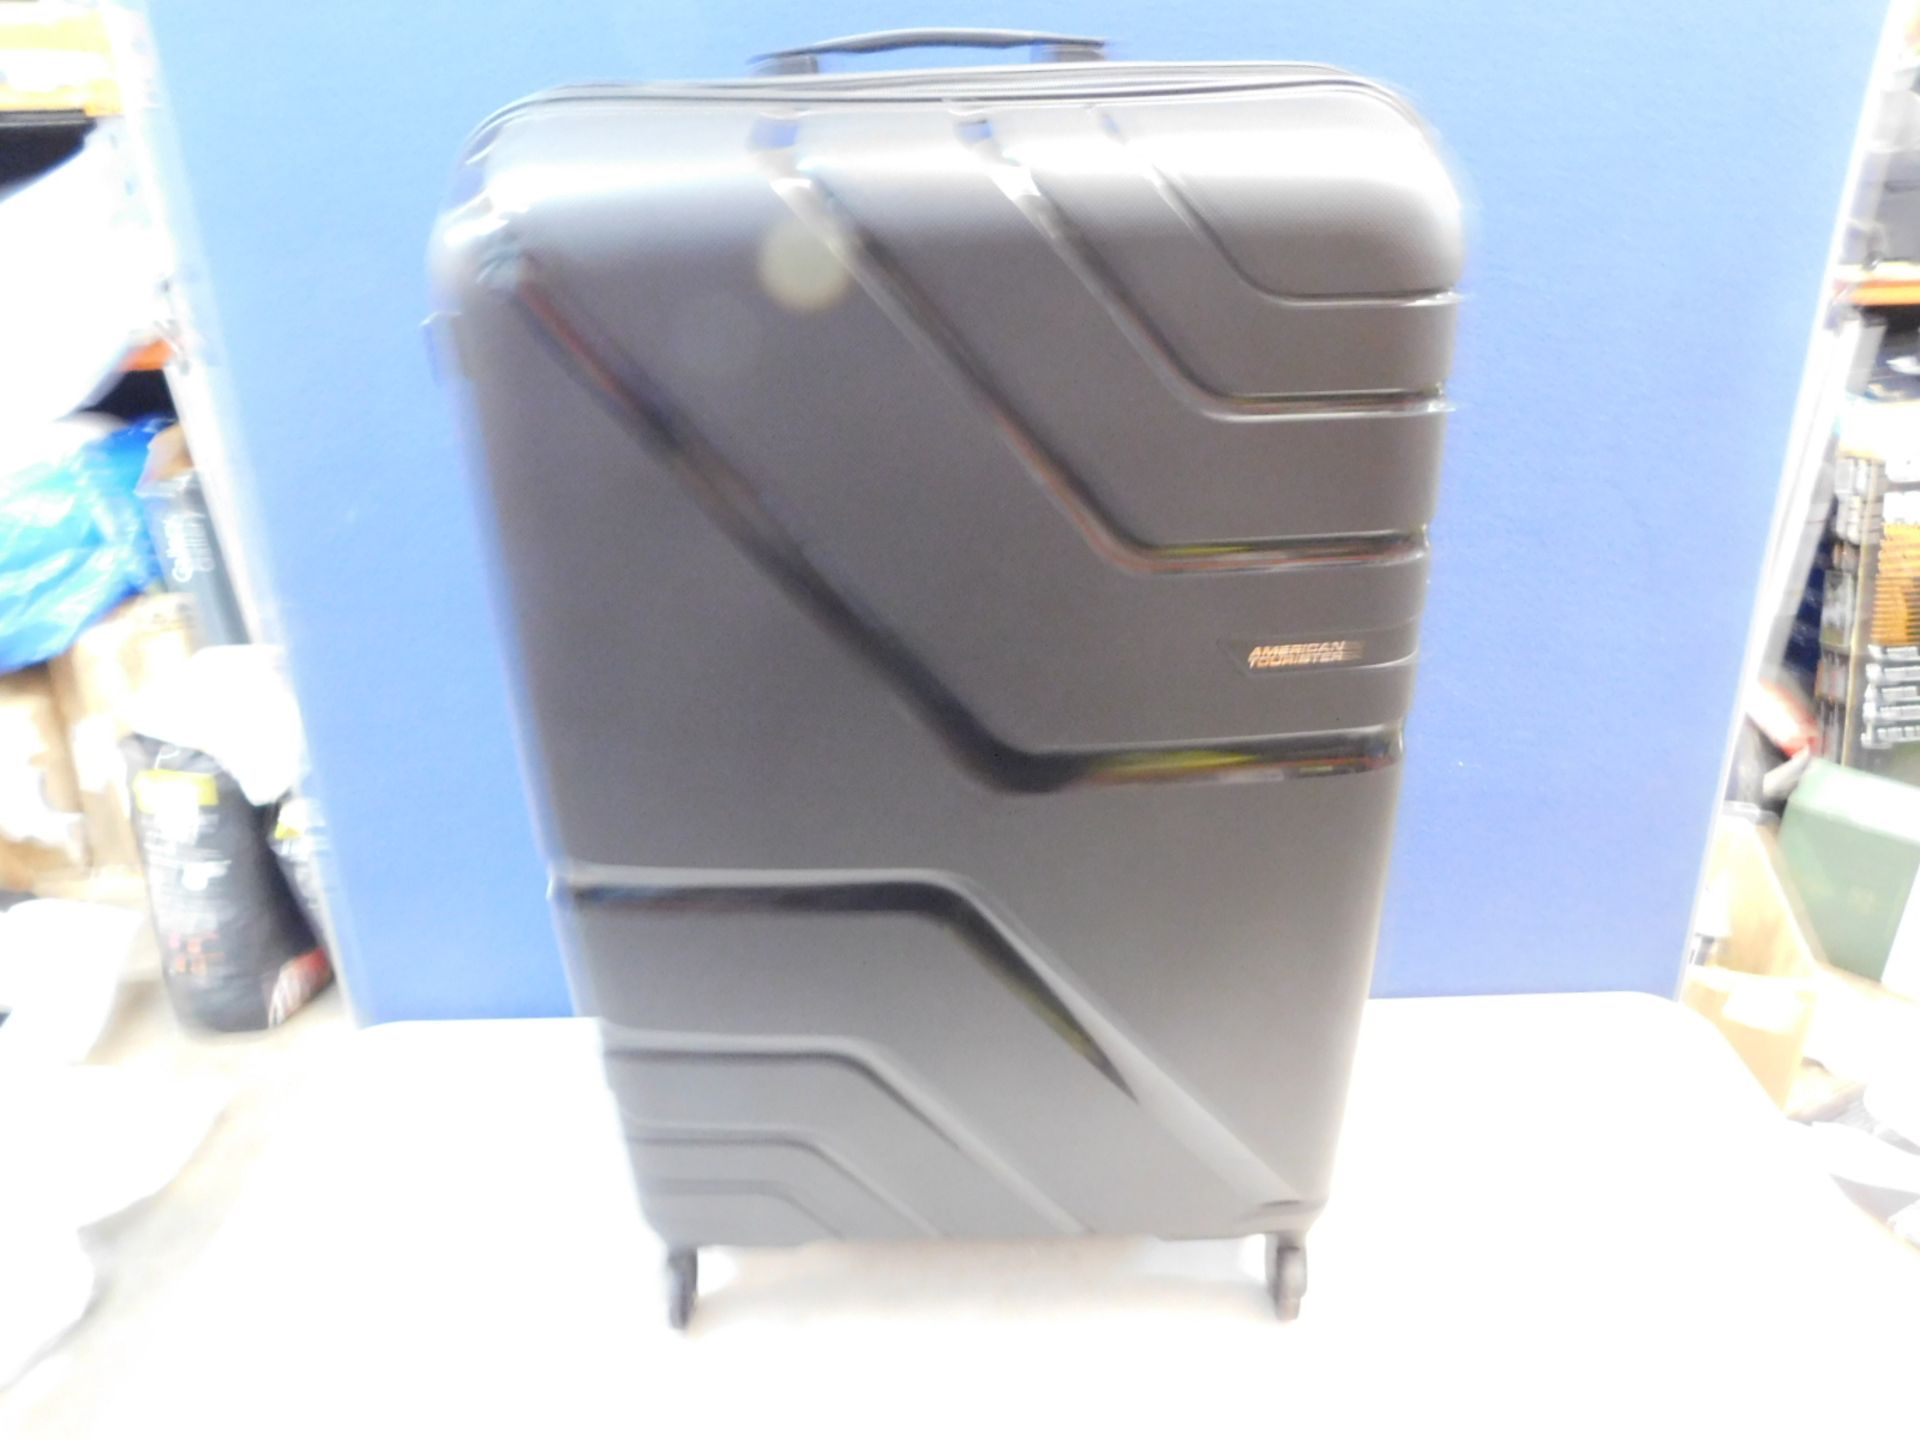 1 AMERICAN TOURISTER BLACK HARDSIDE PROTECTION LARGE LUGGAGE RRP Â£99